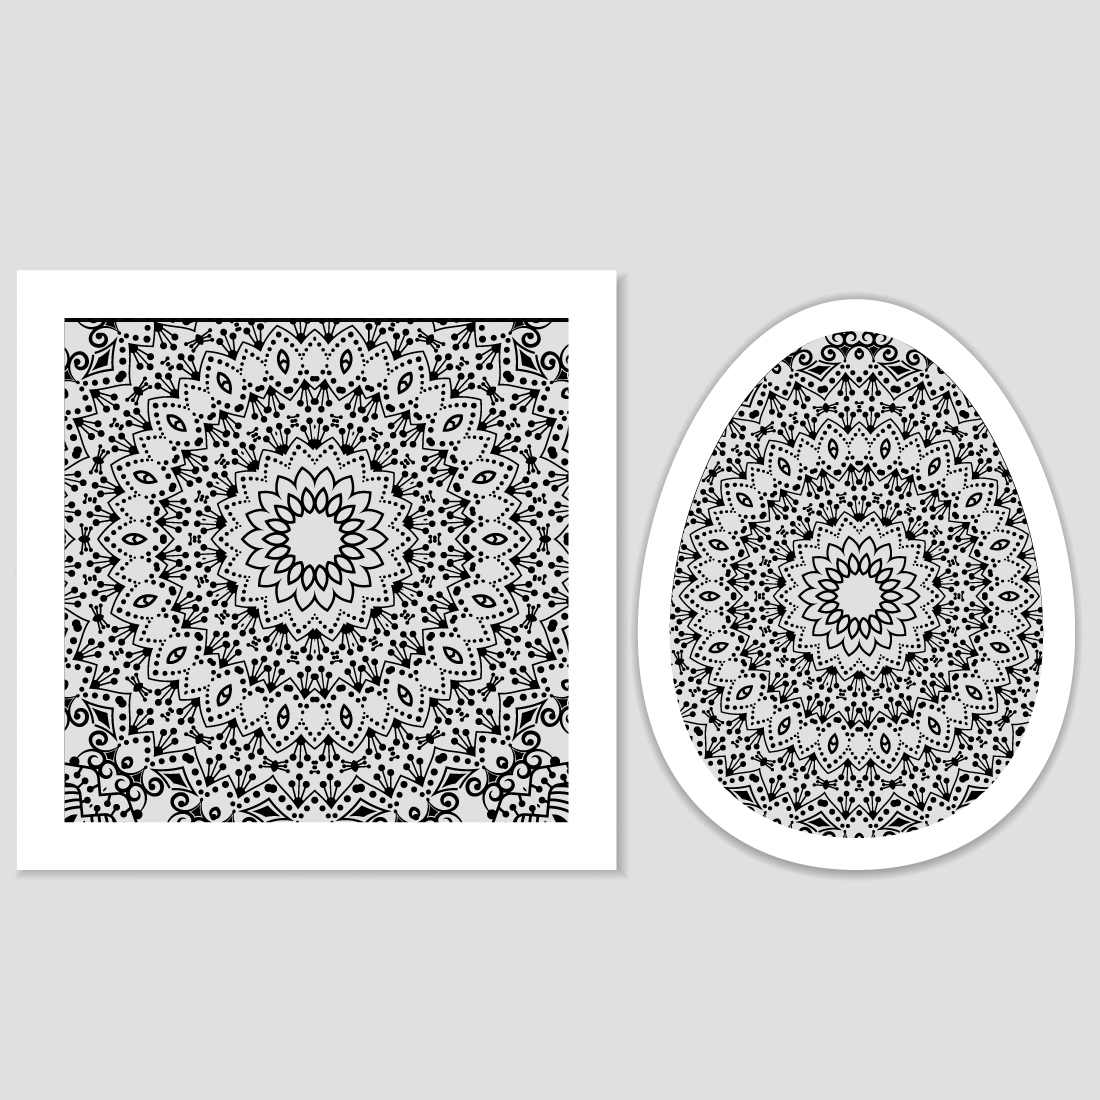 Luxury Mandala Background For Book Cover, Wedding Invitation, Or Other Project Cover.